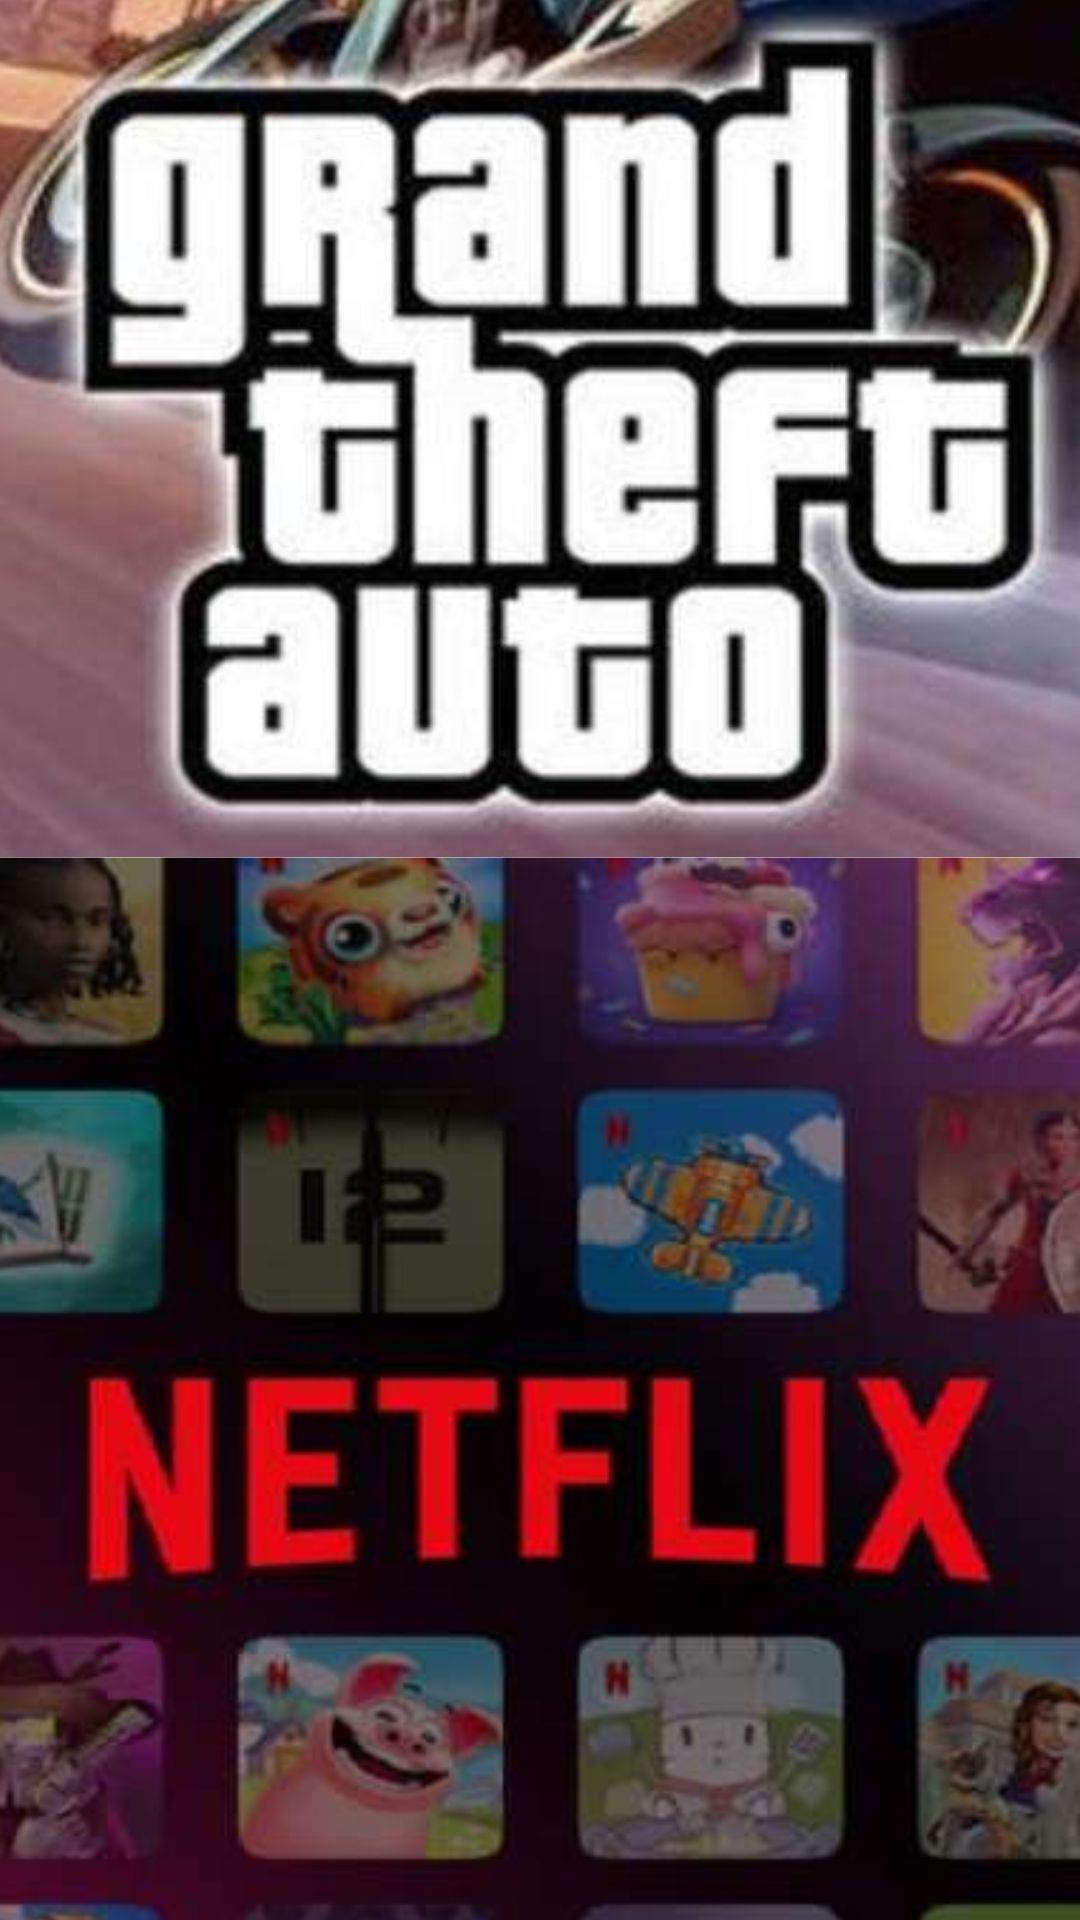 Netflix adds free Grand Theft Auto games for mobile play
